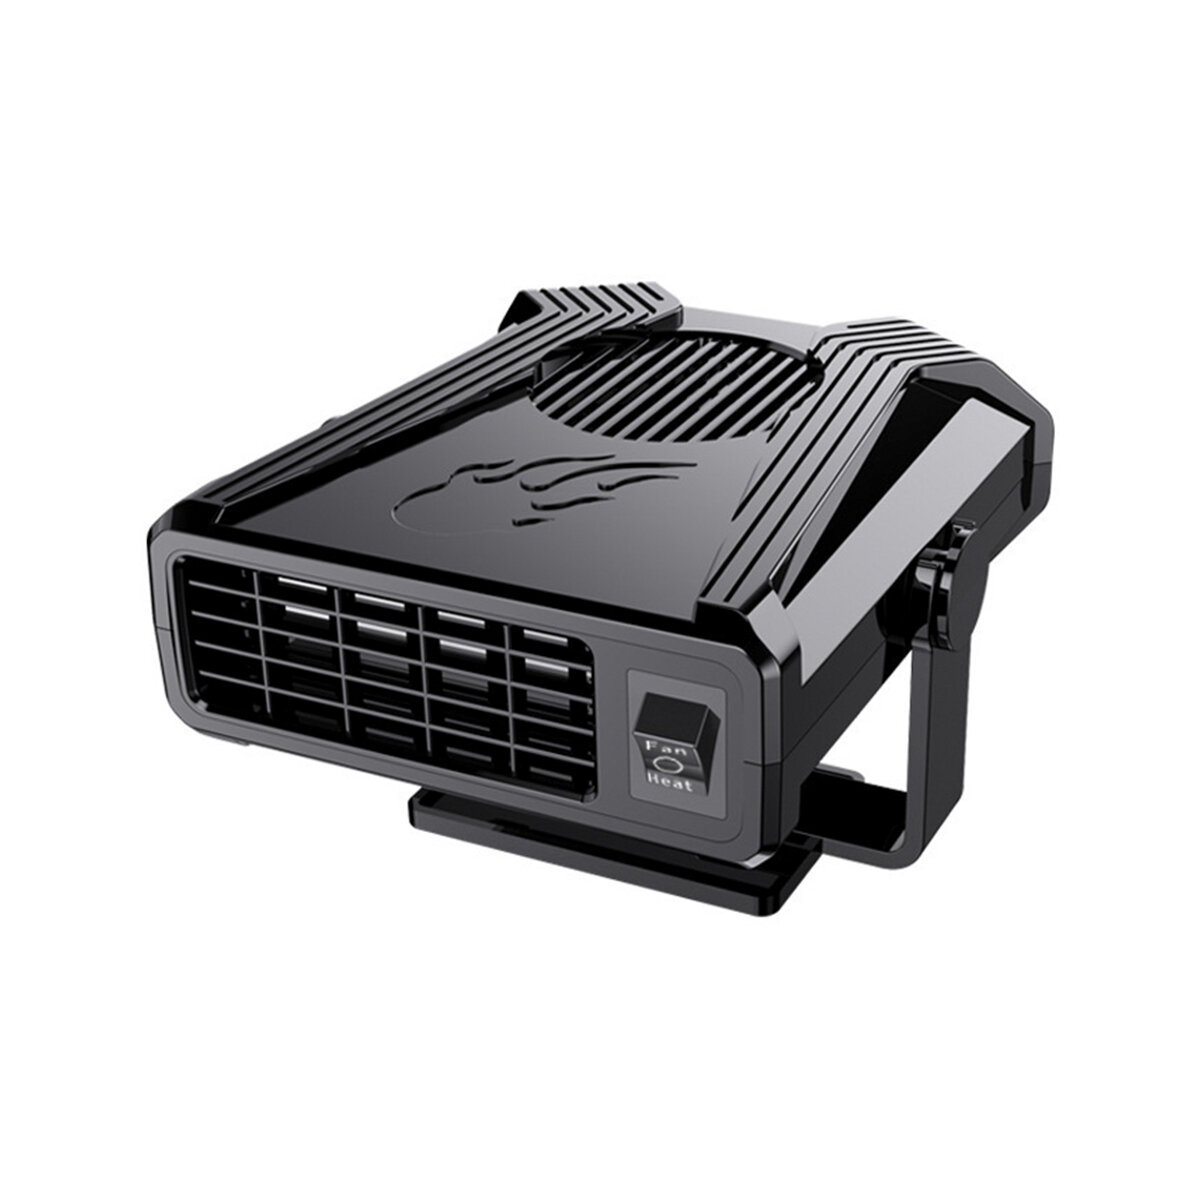 12V 24V 500W Electric Car Heater DC Heating Fan Defroster Demister Vehicle Fan For Camping Travel RV Car